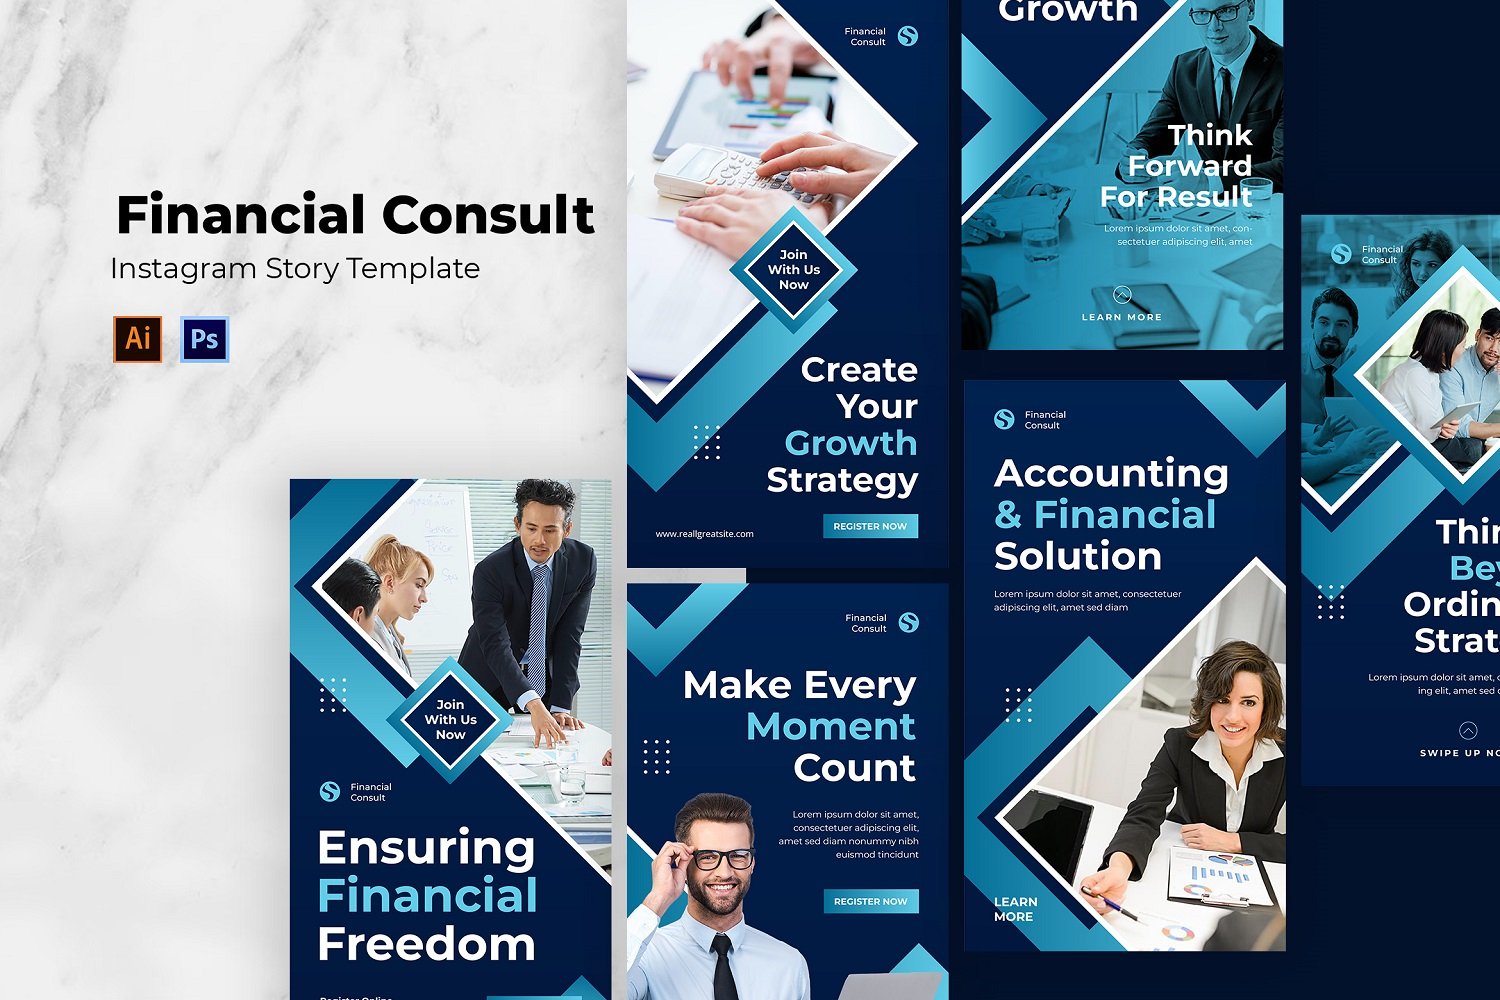 Financial Consult Instagram Story